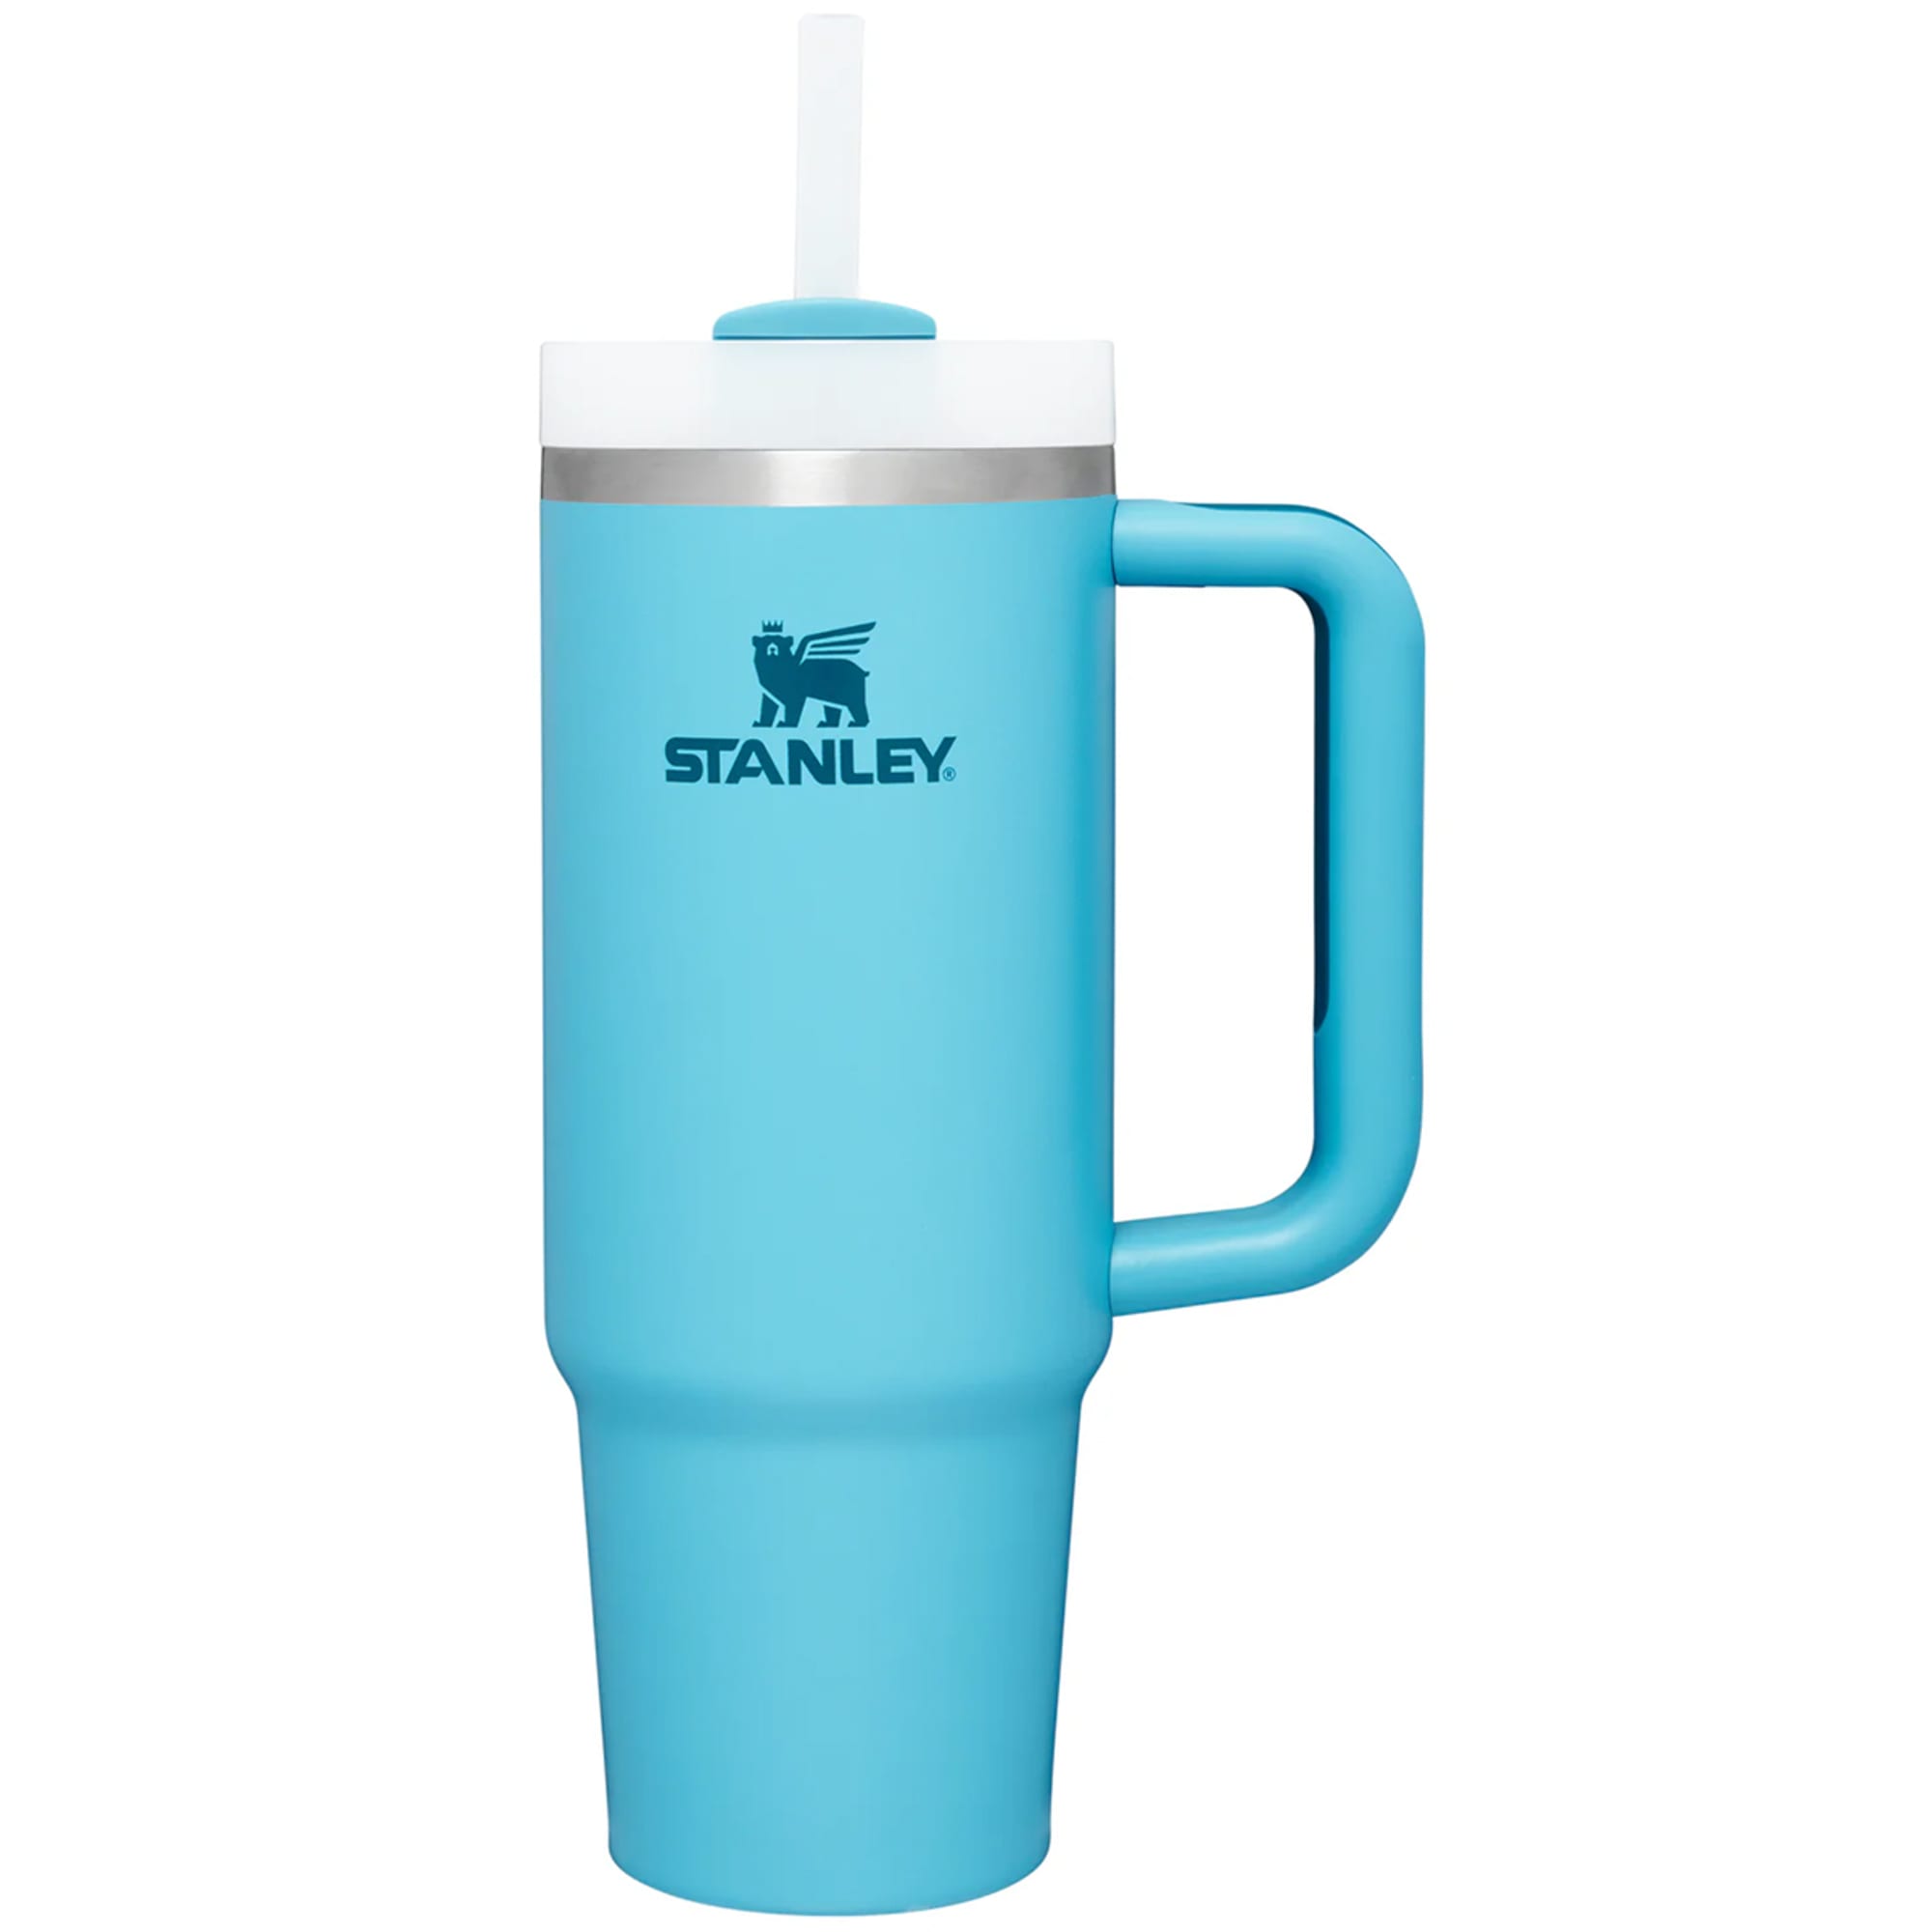 STANLEY The Quencher H2.0 Flowstate Tumbler - 30 OZ - Eastern Mountain  Sports